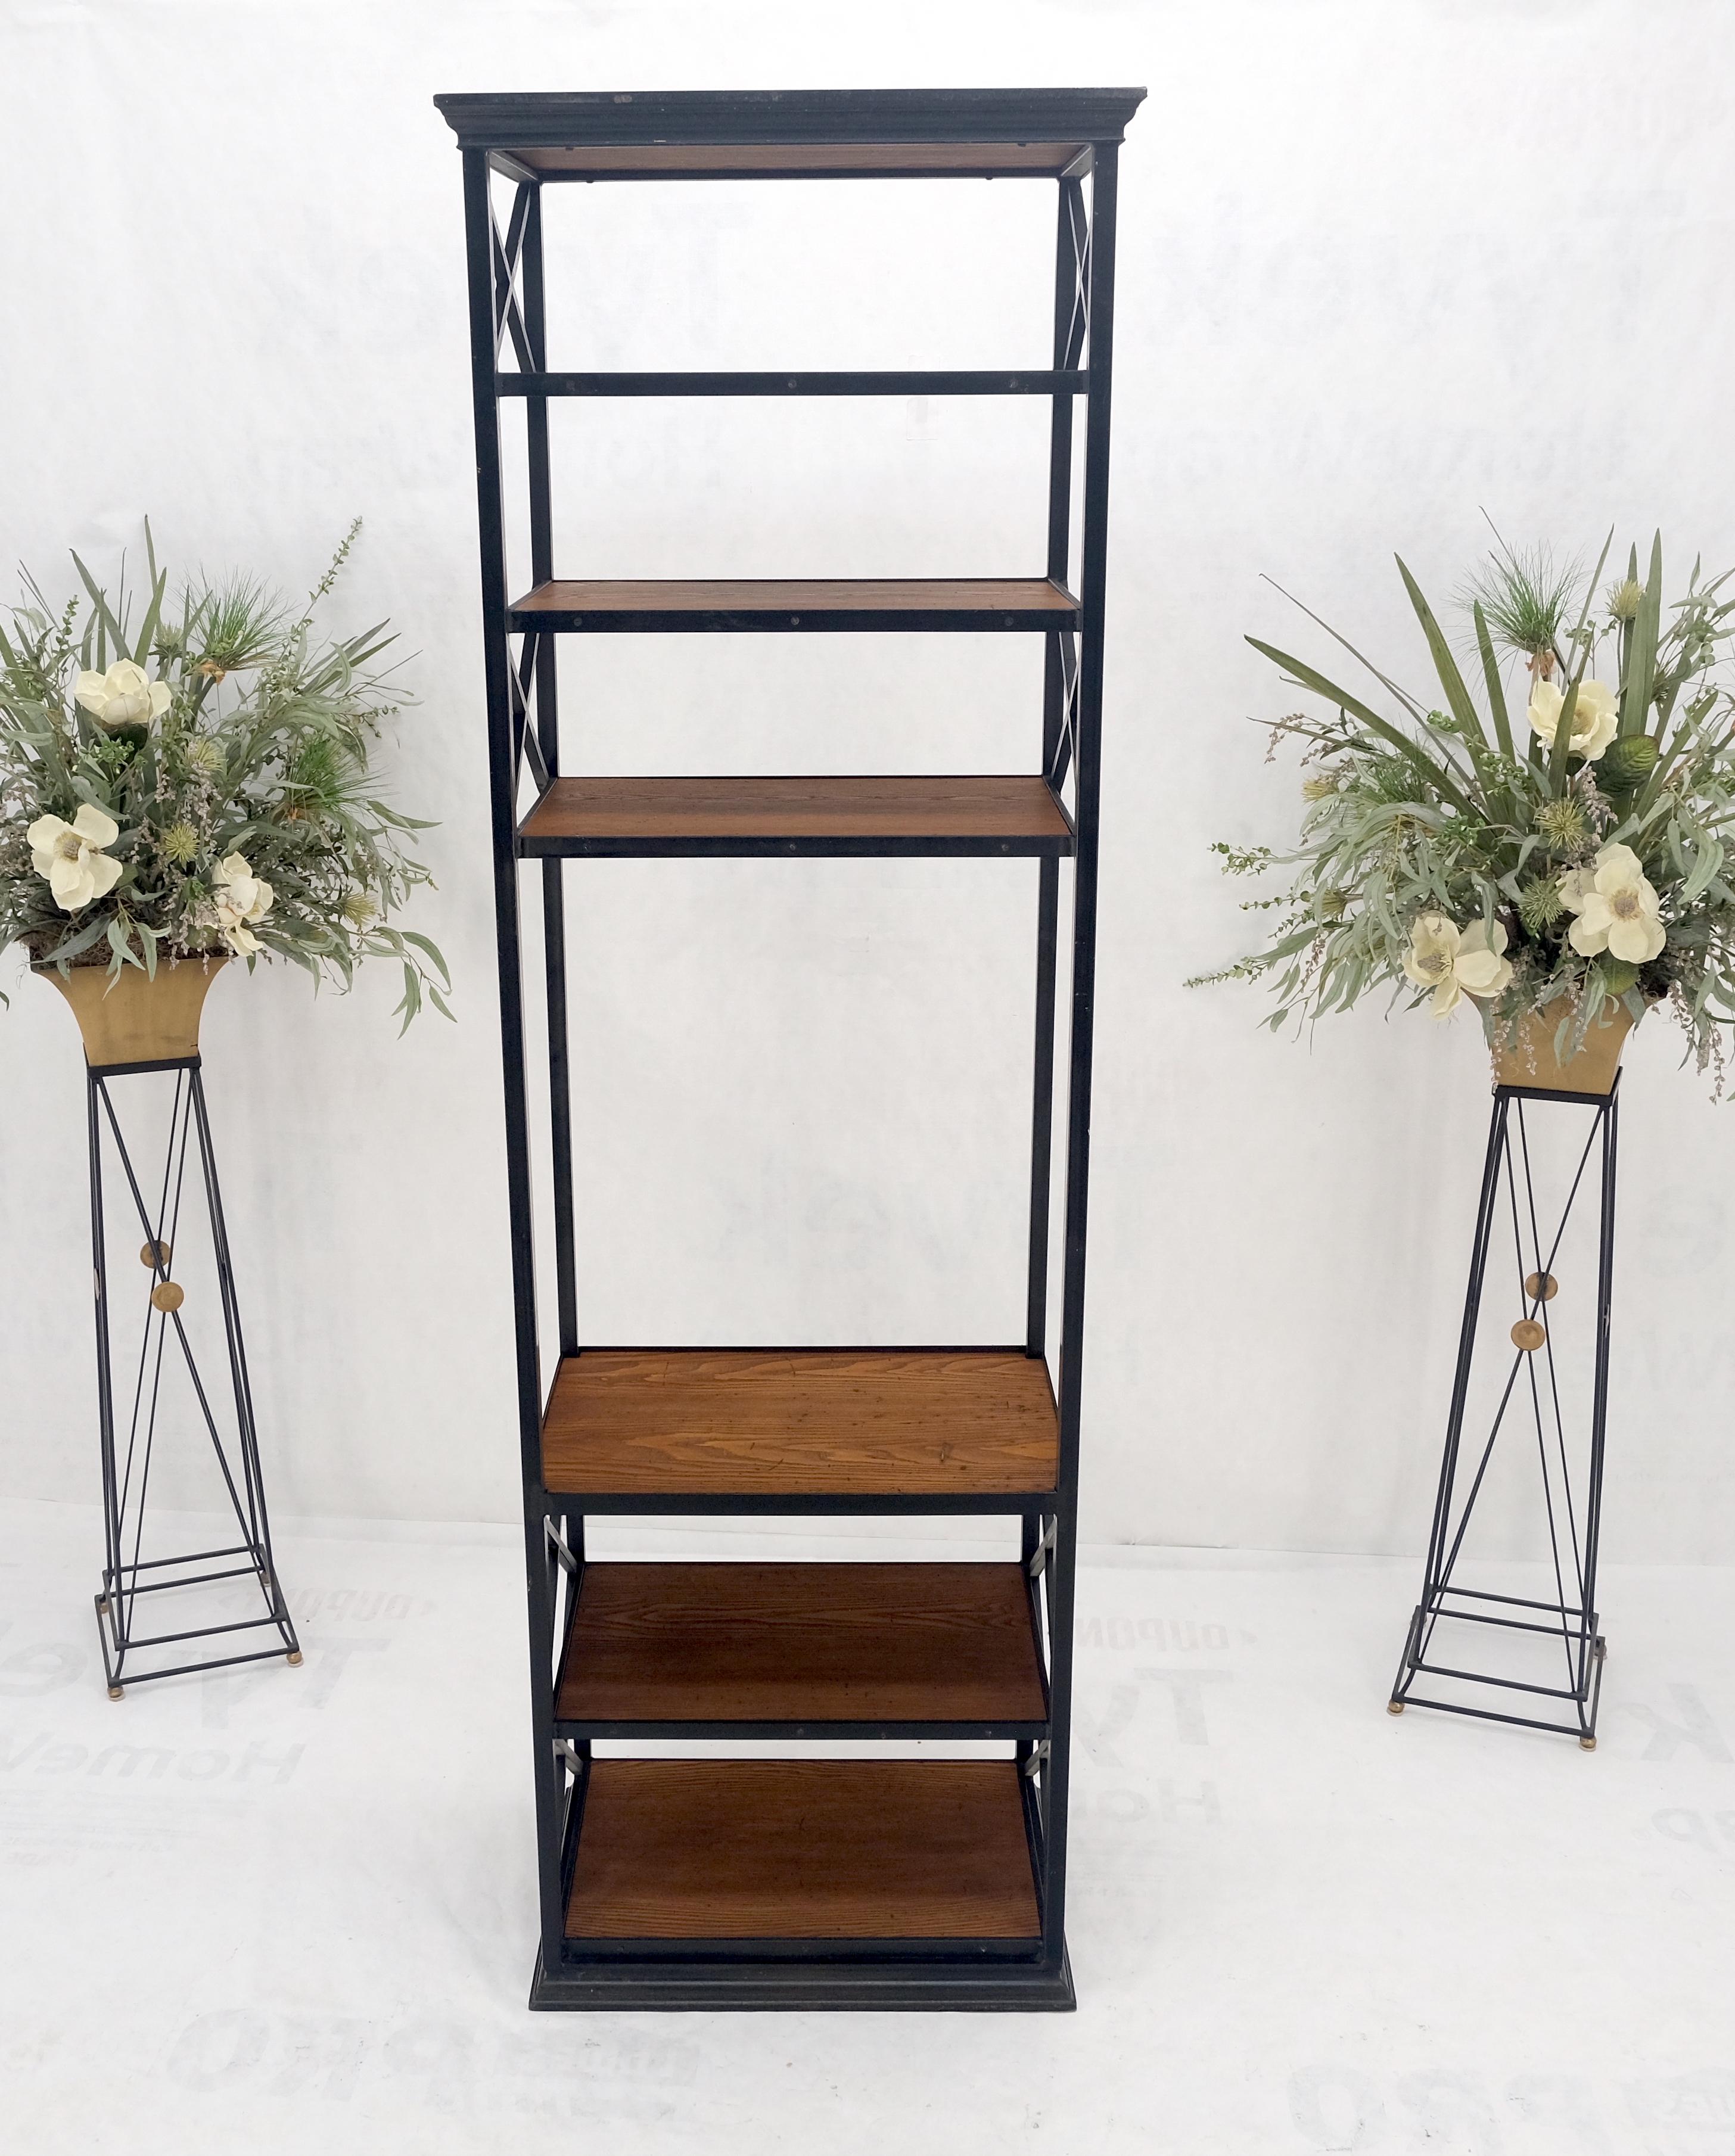 Black Steel & Wormy Chestnut Shelves 8 Foot Tall Etagere BookCase Display MINT In Good Condition For Sale In Rockaway, NJ